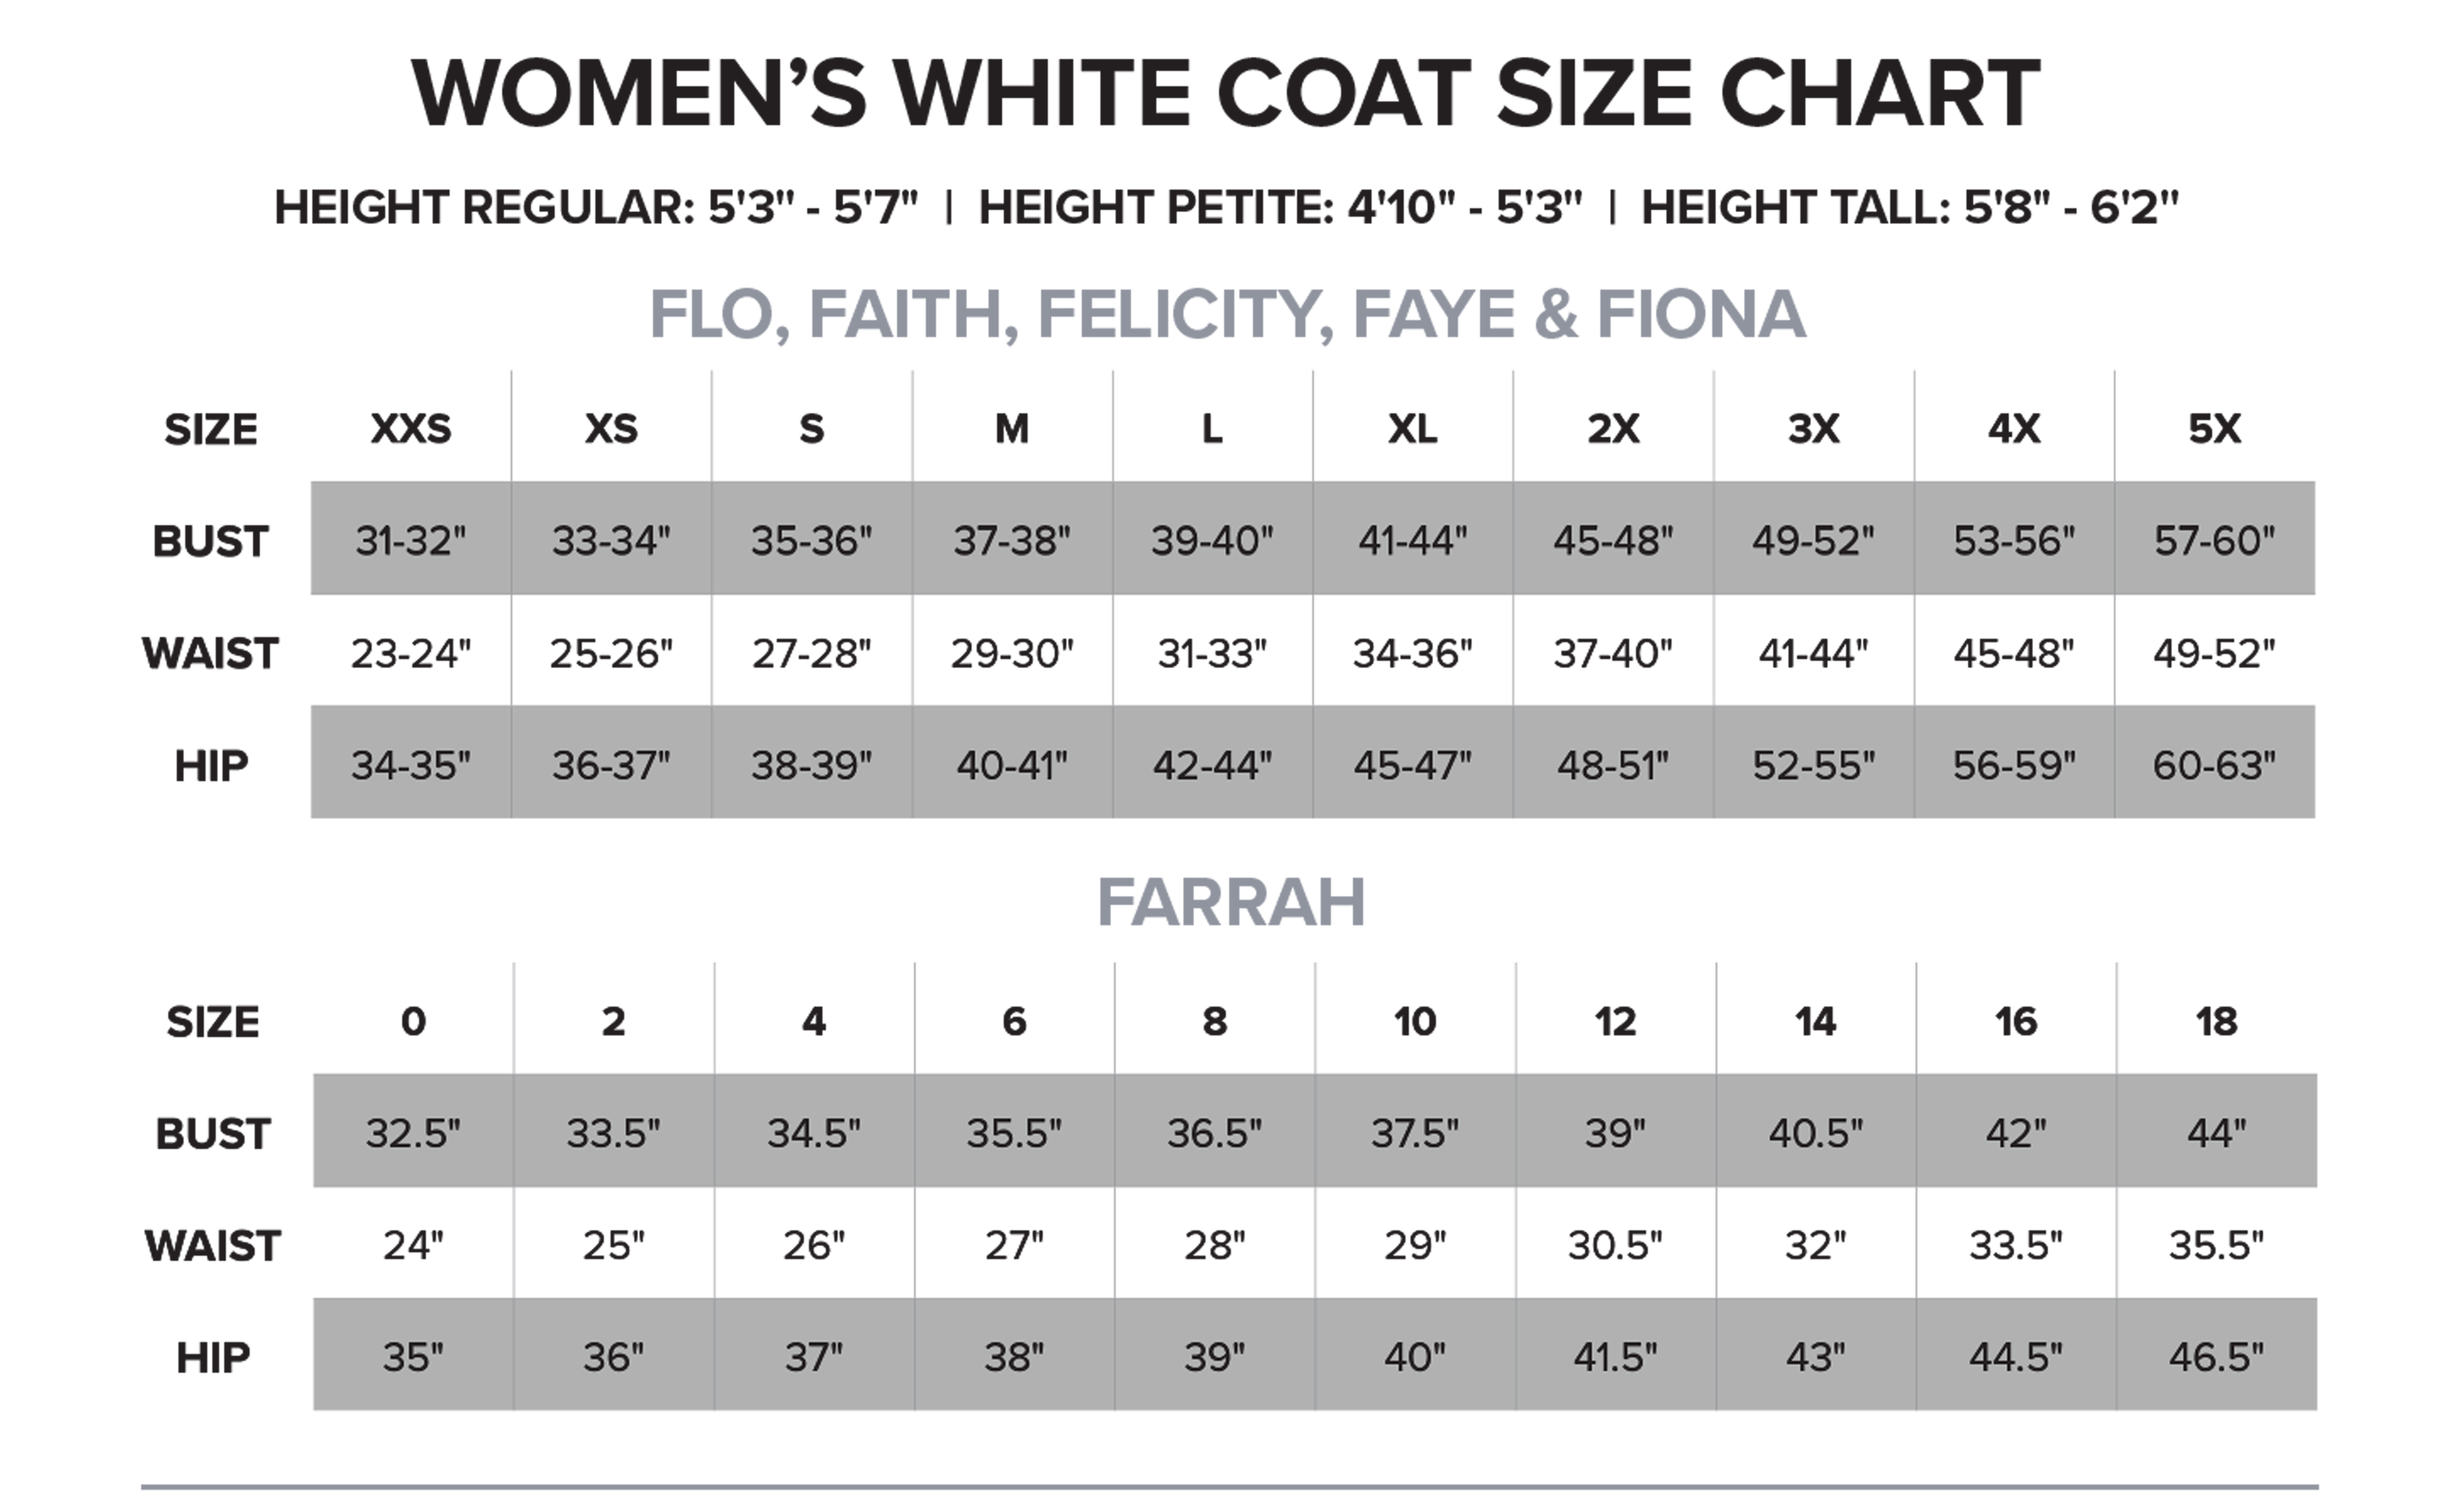 The White Coat Size Chart for Women